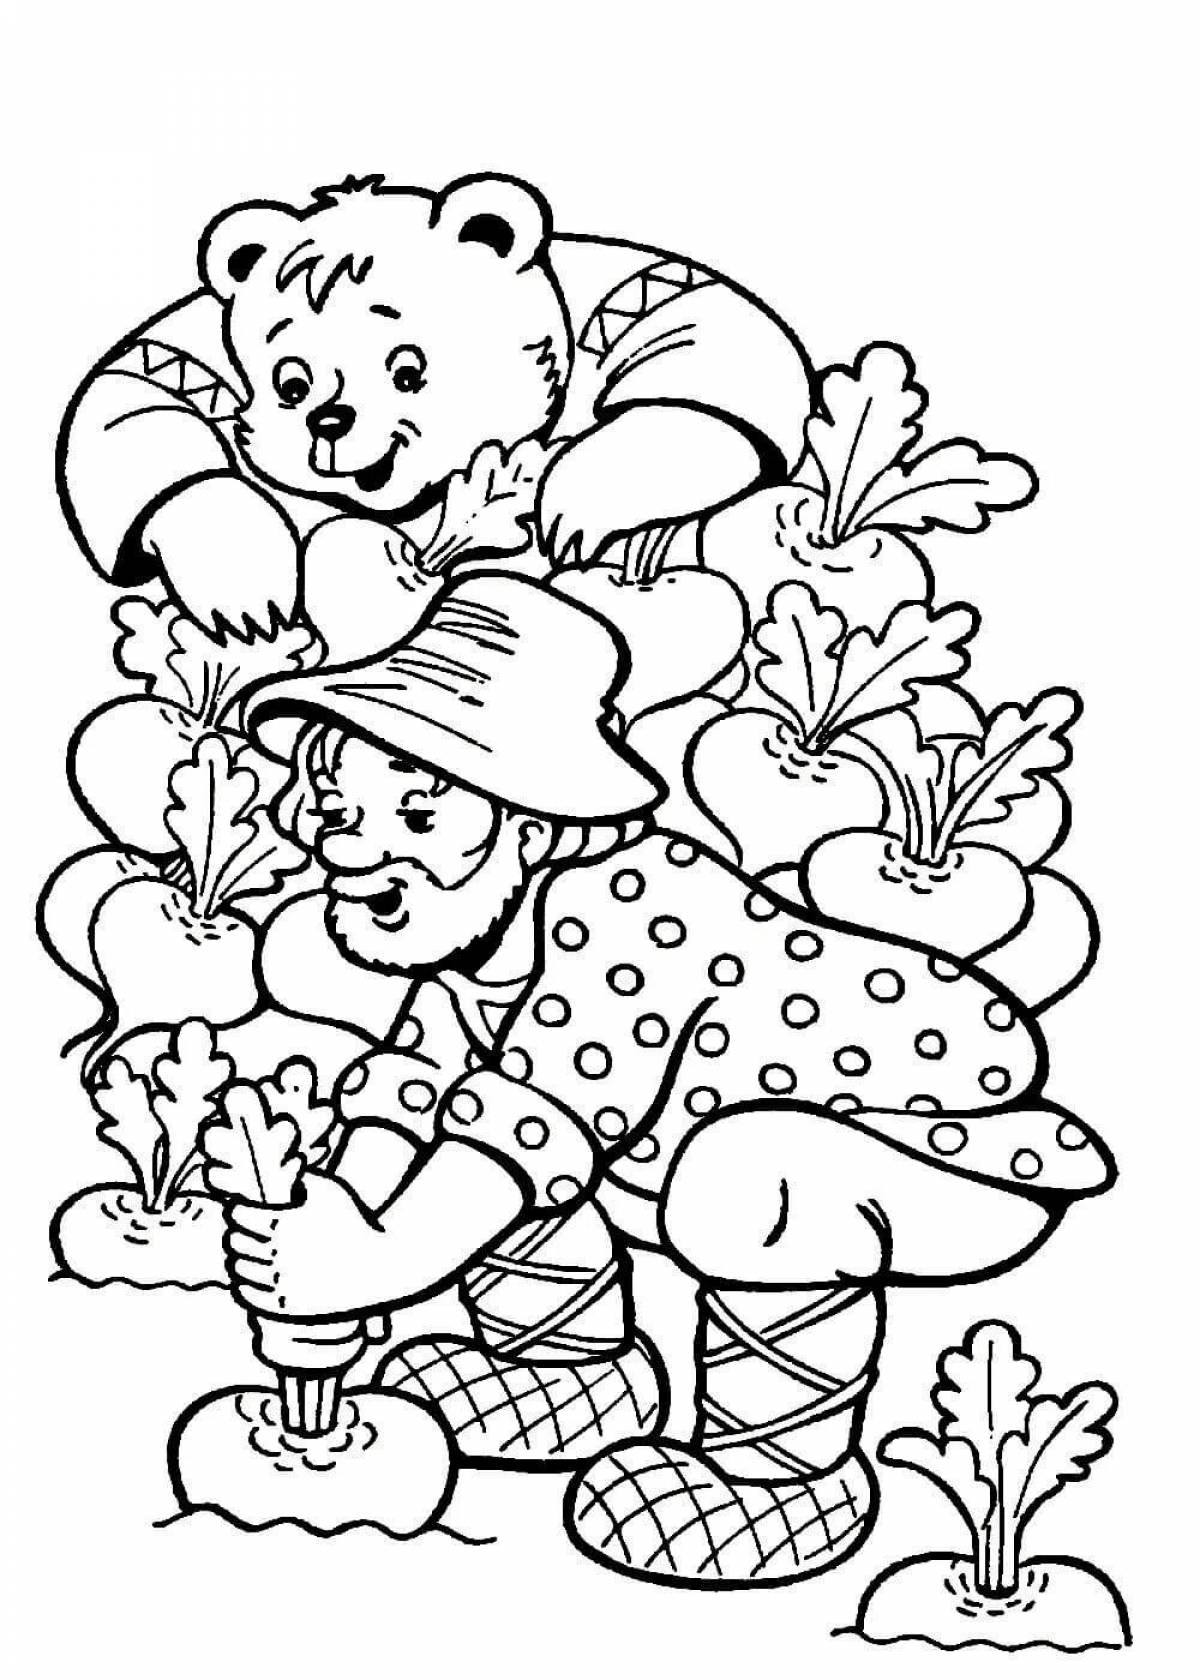 Glorious coloring book for children Russian folk